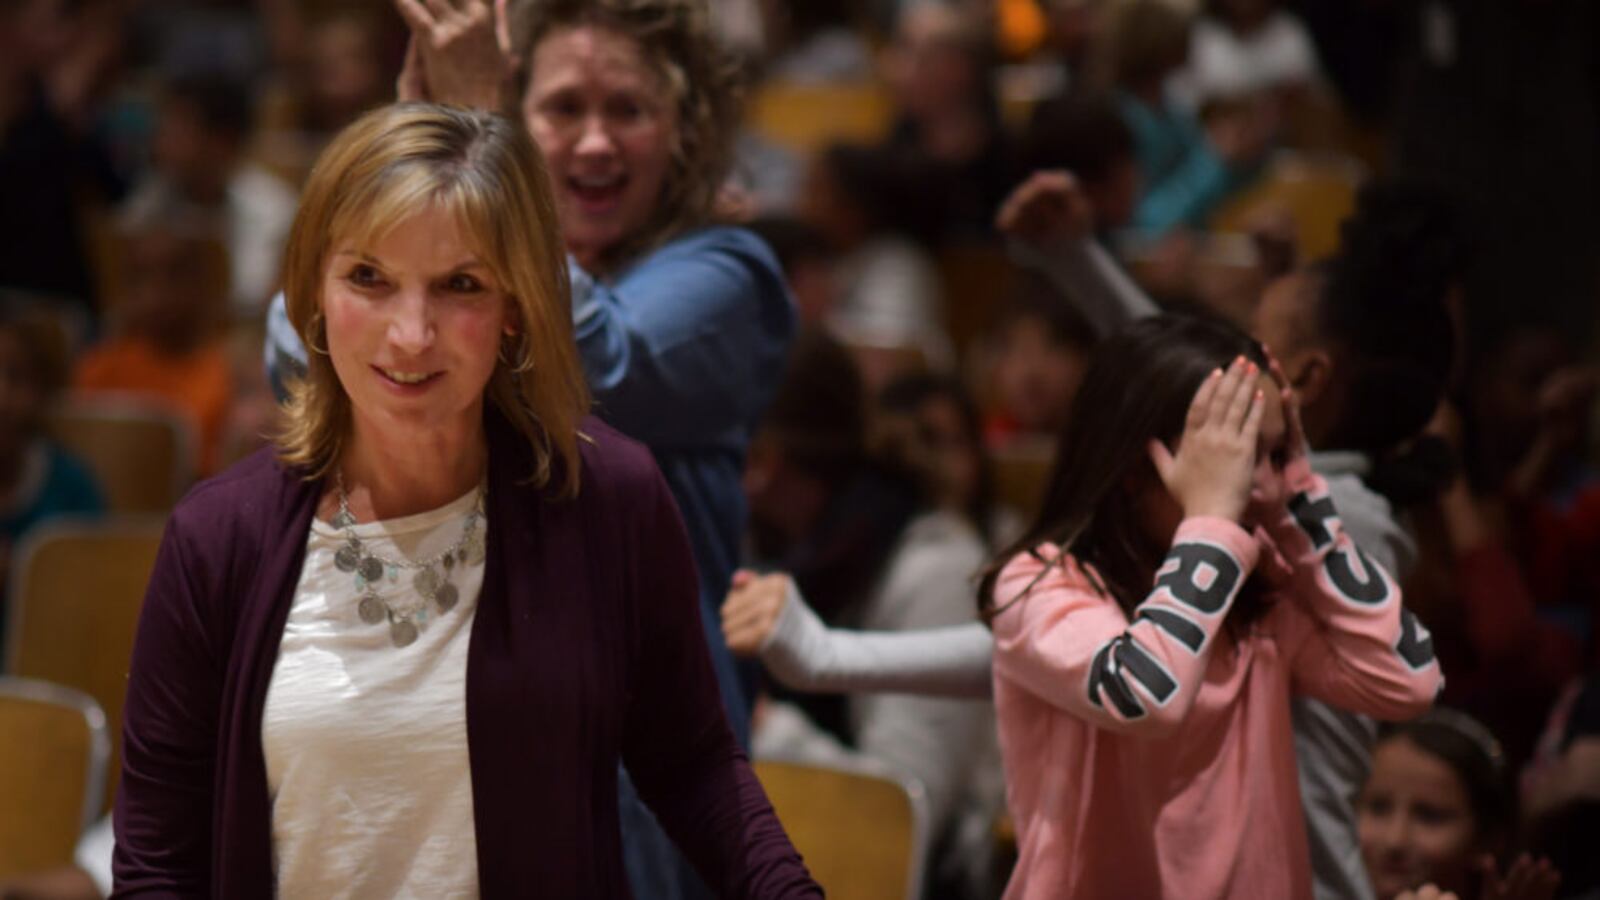 Margaret "Meg" Cypress, a fifth-grade teacher at Bradley International School in Denver, learns she is the 2019 Colorado Teacher of the Year at a school assembly Tuesday.